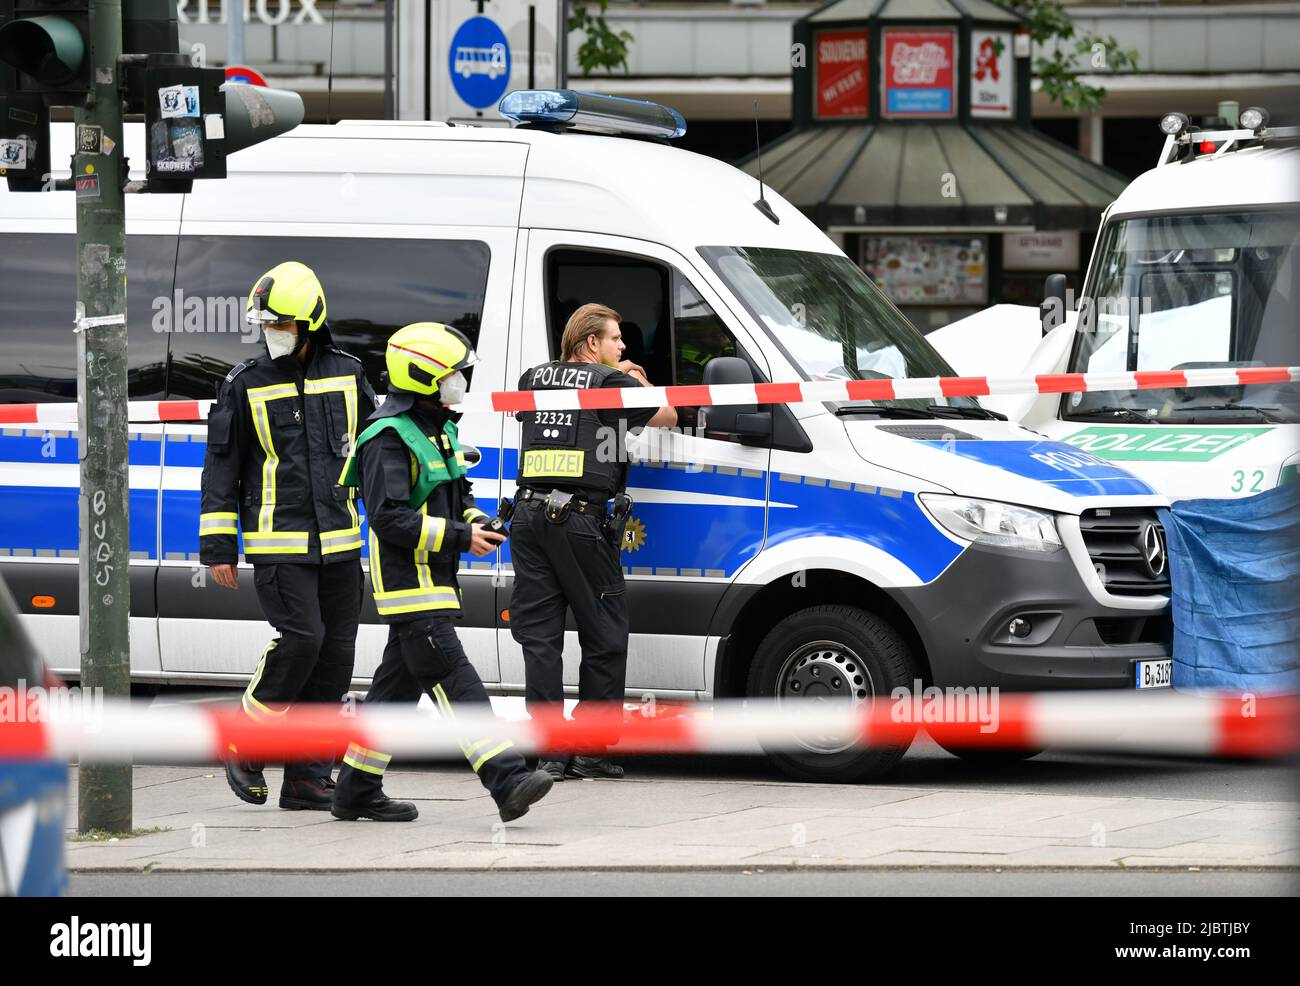 Berlin, Germany. 8th June, 2022. Police officers work at the scene after a vehicle crashed into a crowd in Berlin, Germany, June 8, 2022. A vehicle crashed into a crowd of people in Berlin's Charlottenburg locality, leaving one person killed and more than a dozen injured, German news agency dpa reported on Wednesday. Credit: Ren Pengfei/Xinhua/Alamy Live News Stock Photo